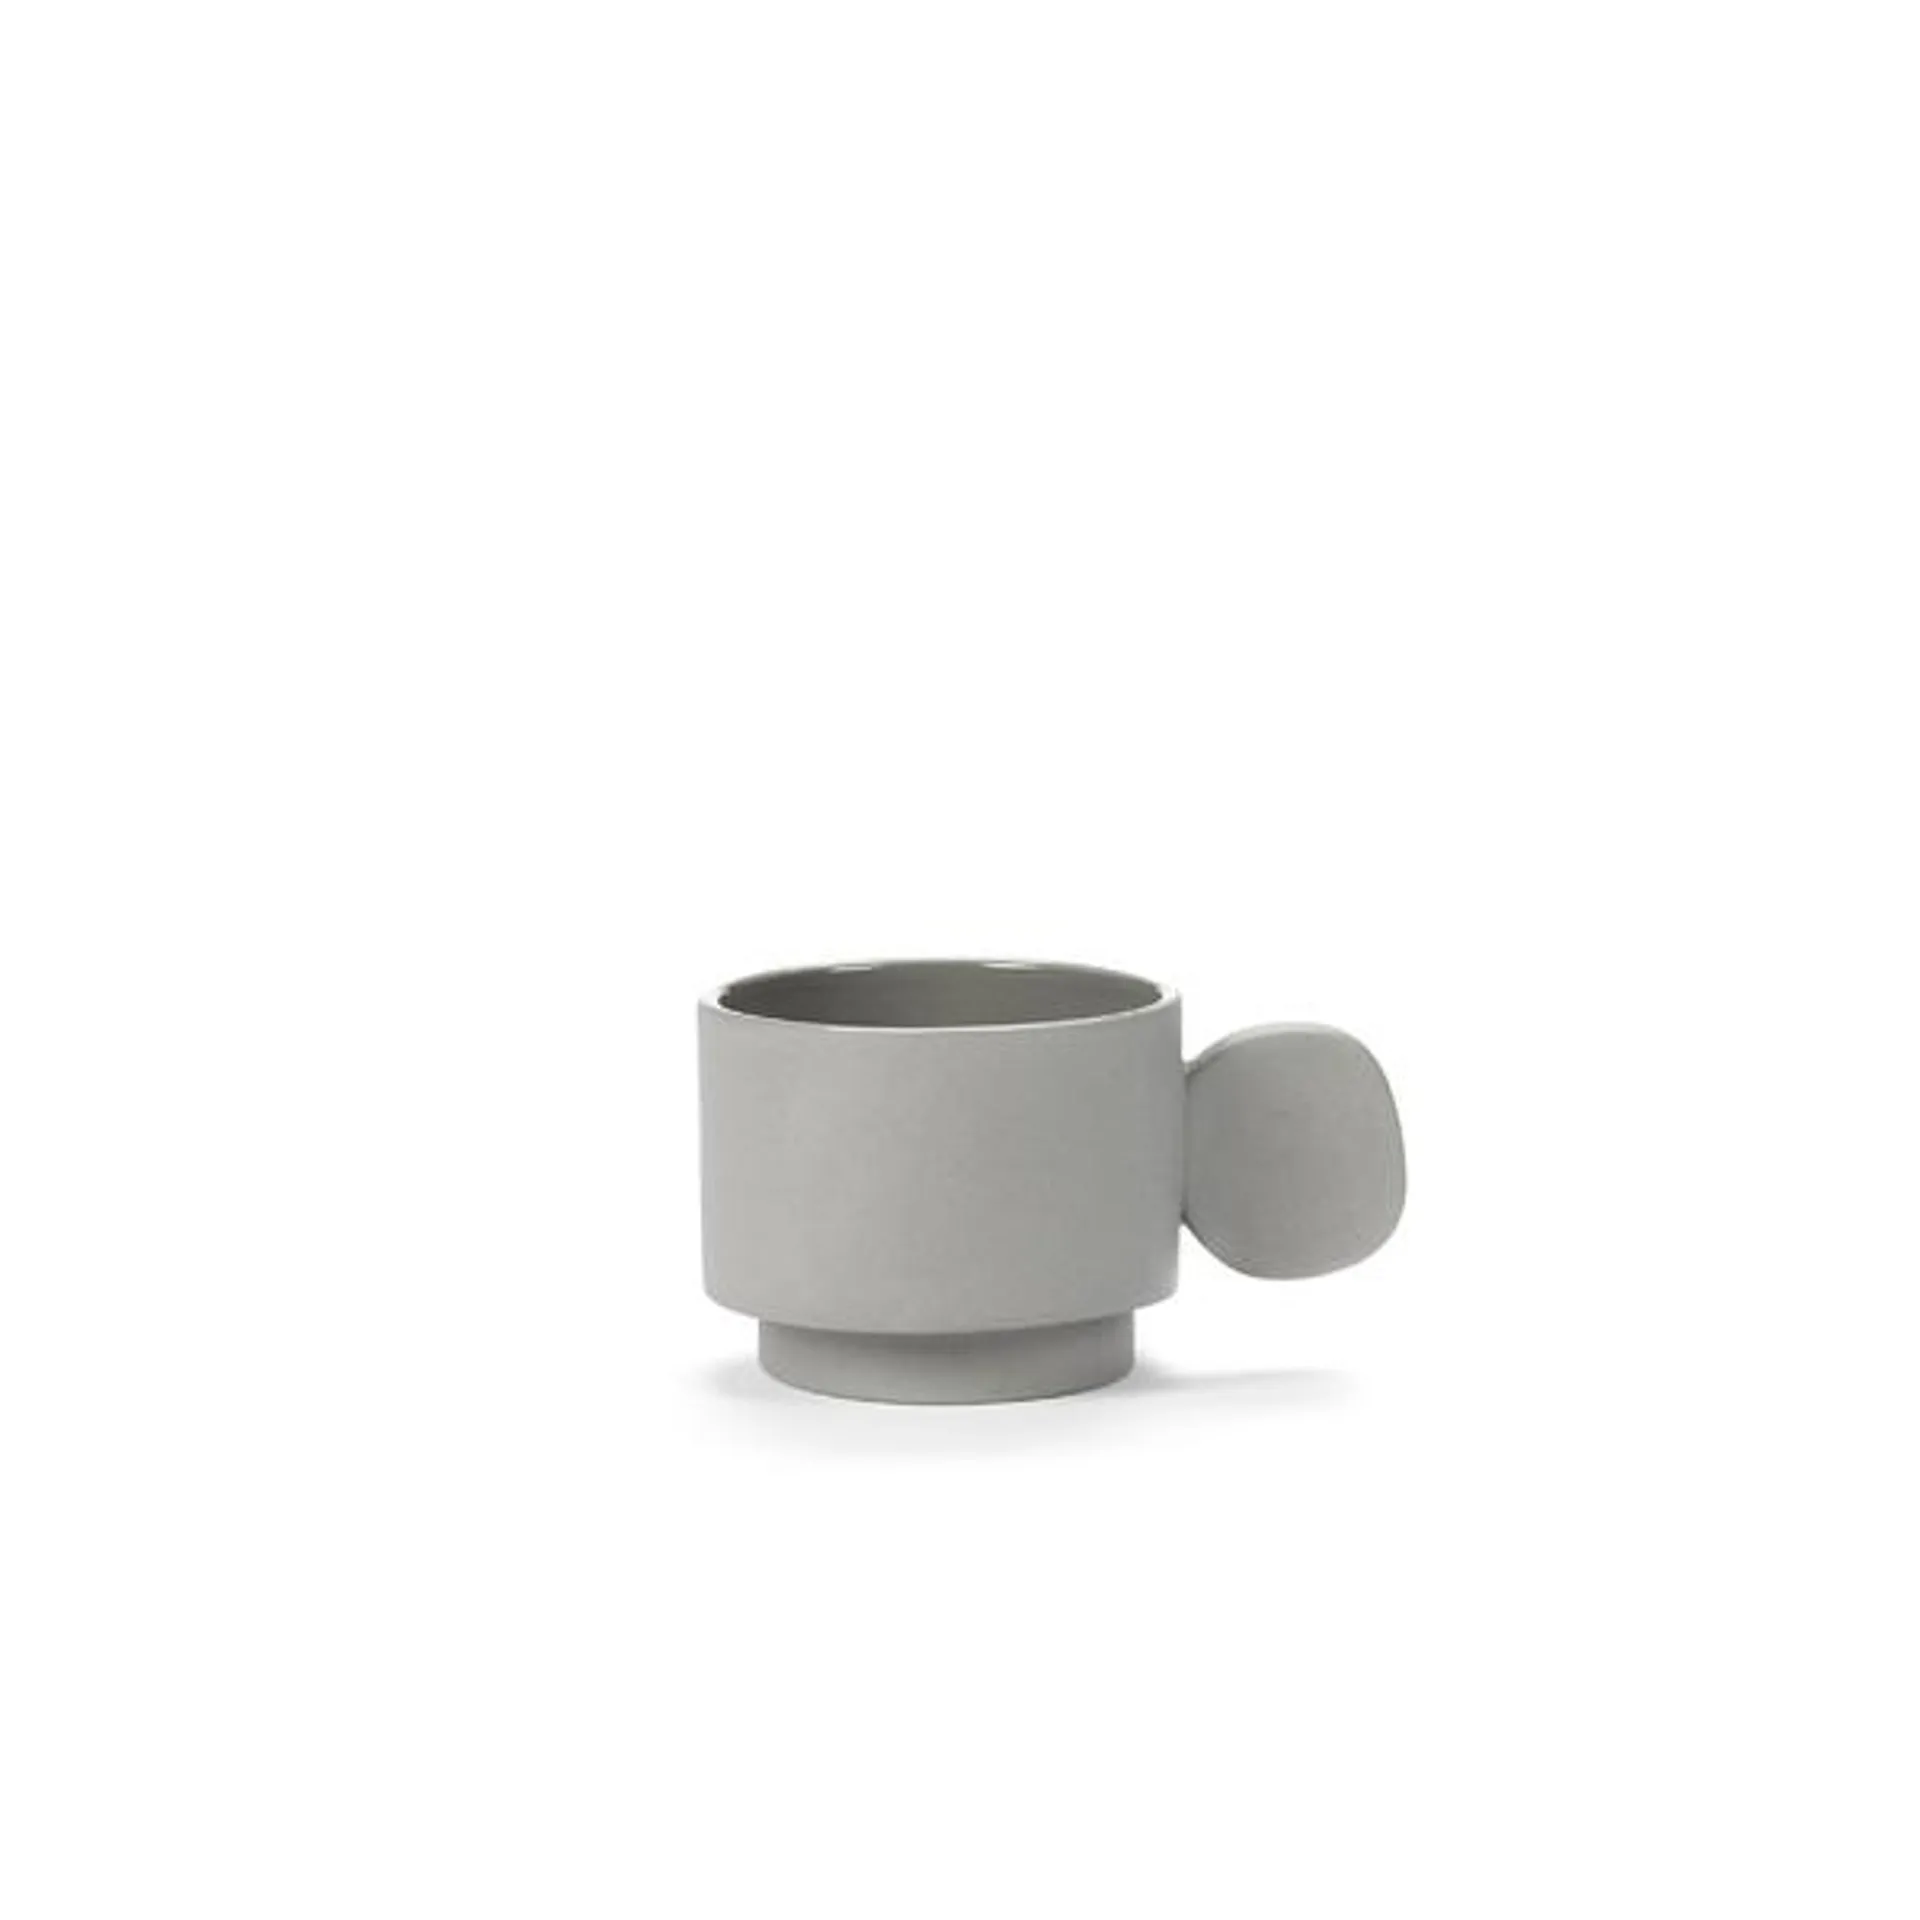 Valerie Objects Inner Circle Cup Light Grey V9020007LG